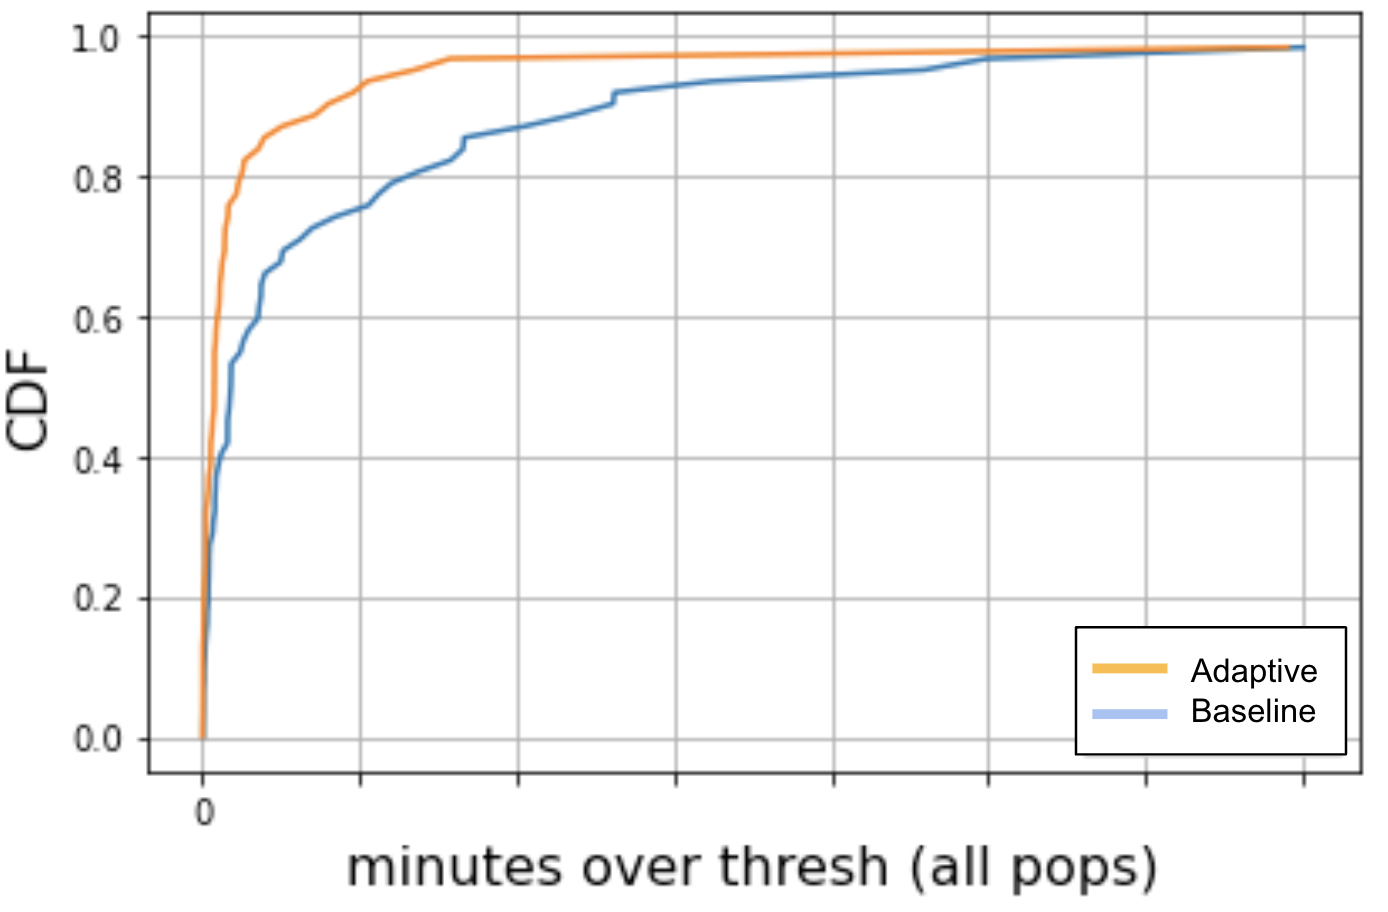 Aggregate minutes spent by servers delivering load higher than the specified threshold (1.8 median) over 4 days, for all PoPs